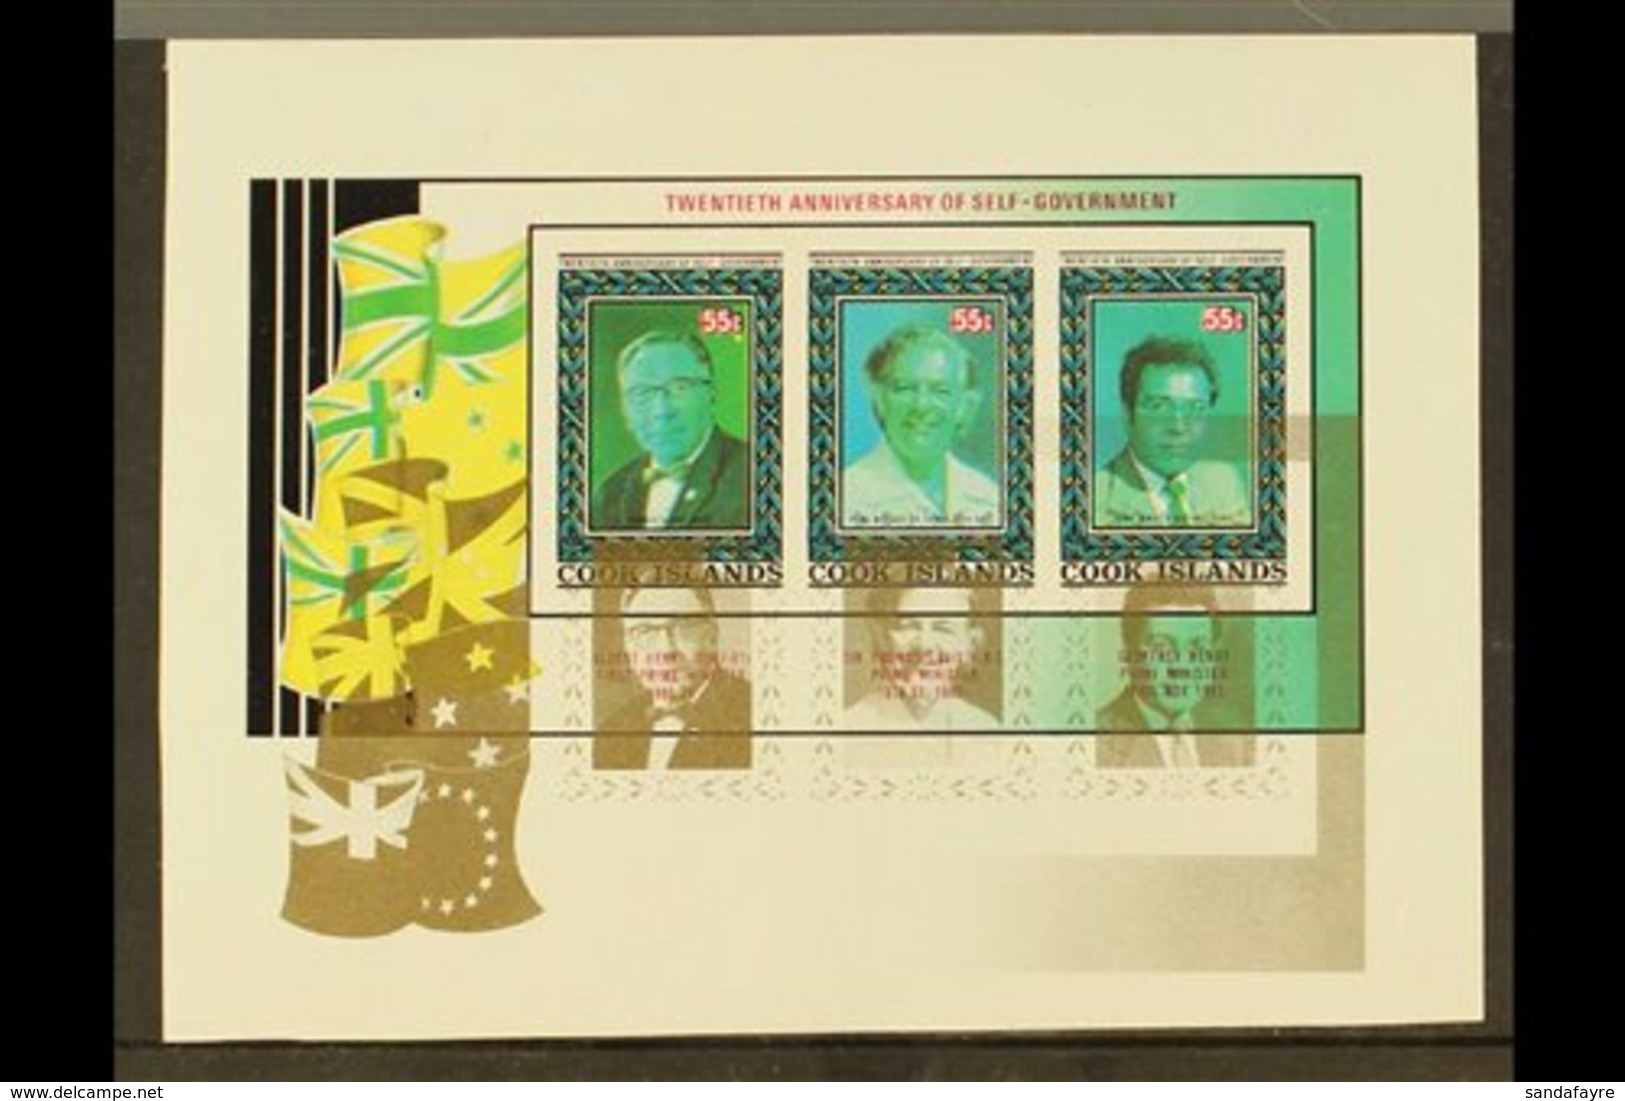 1985 20th Anniversary Of Self-Government Miniature Sheet (SG MS1043, Scott 879, Yvert BF 158A), IMPERF PROOF With The Go - Cook Islands